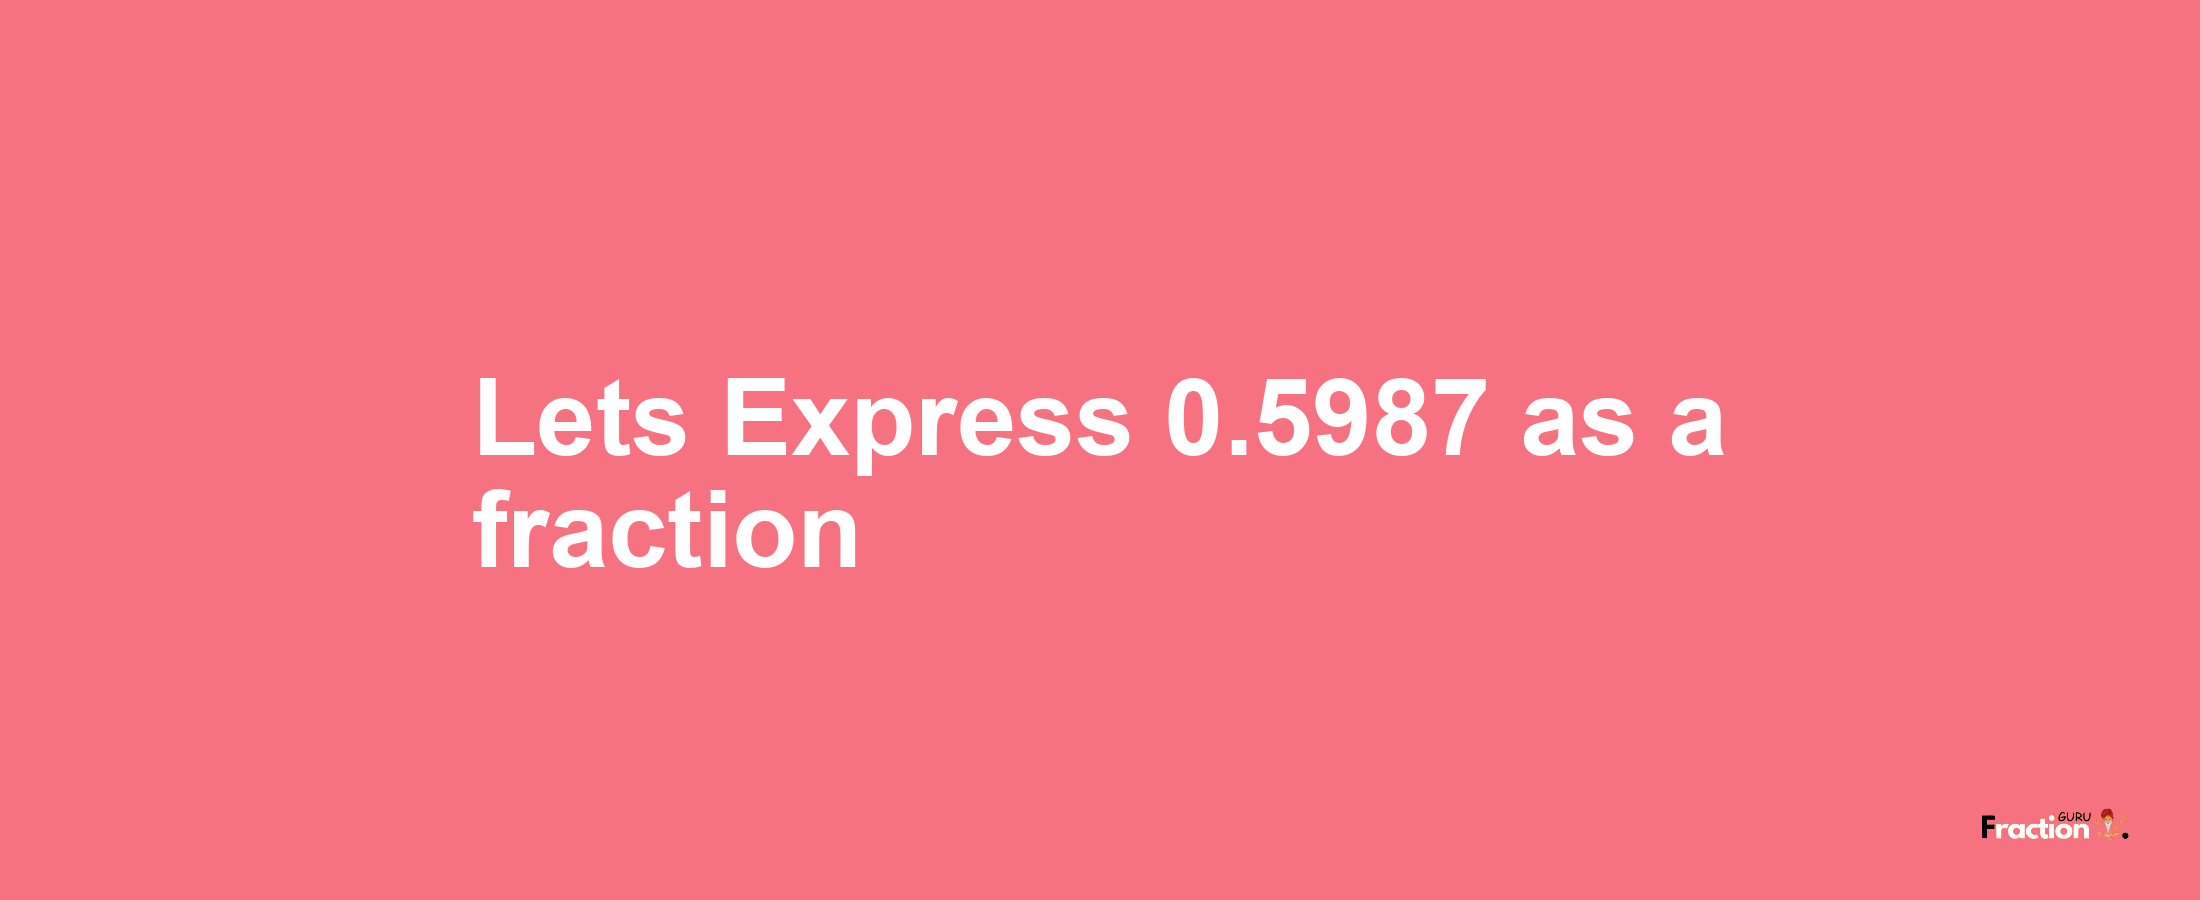 Lets Express 0.5987 as afraction